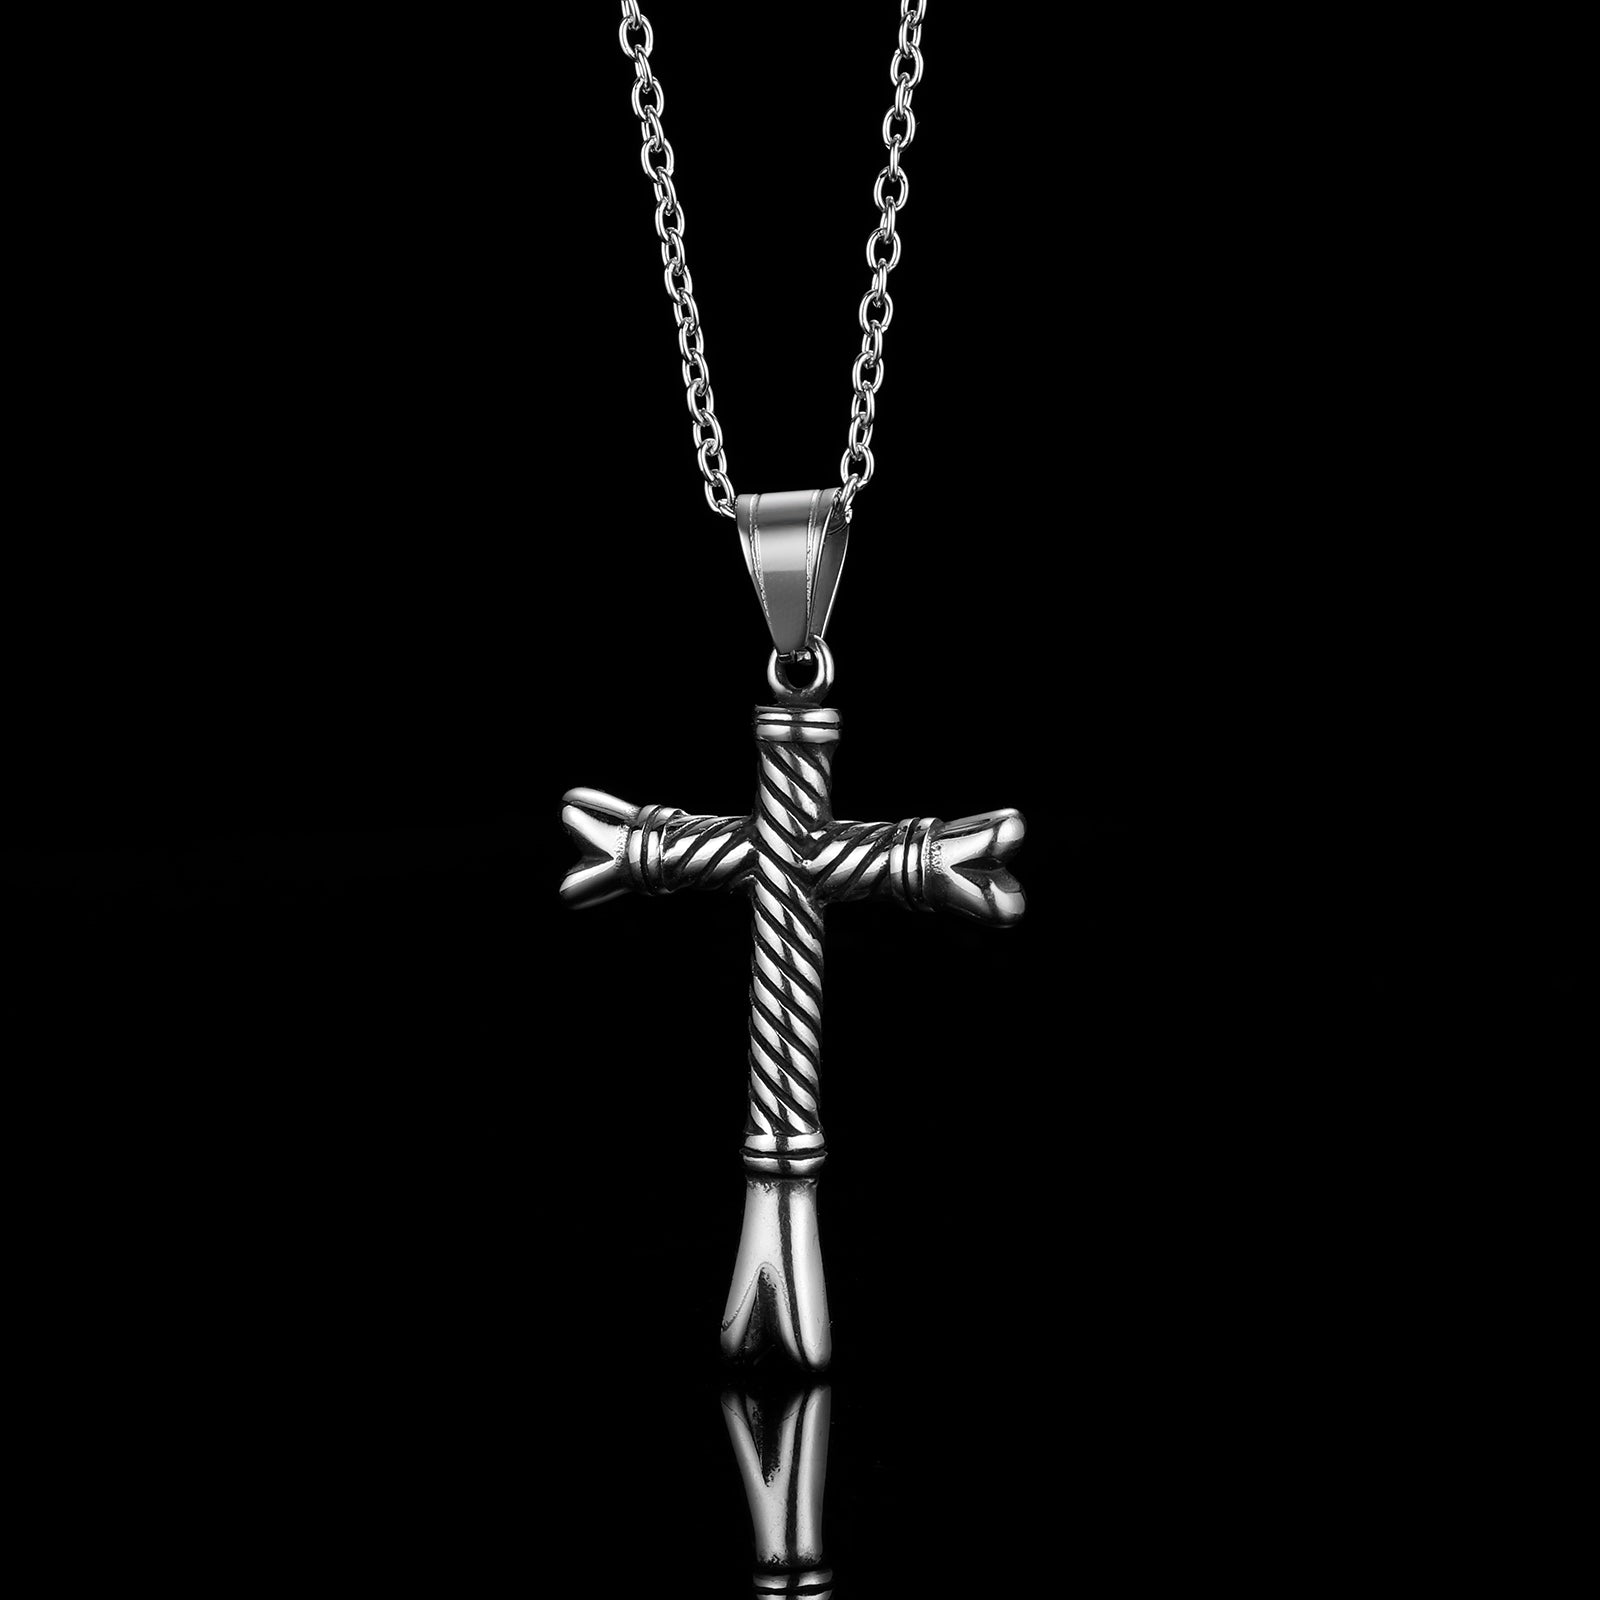 WOODEN CROSS. - NECKLACE - Outlaws Amsterdam